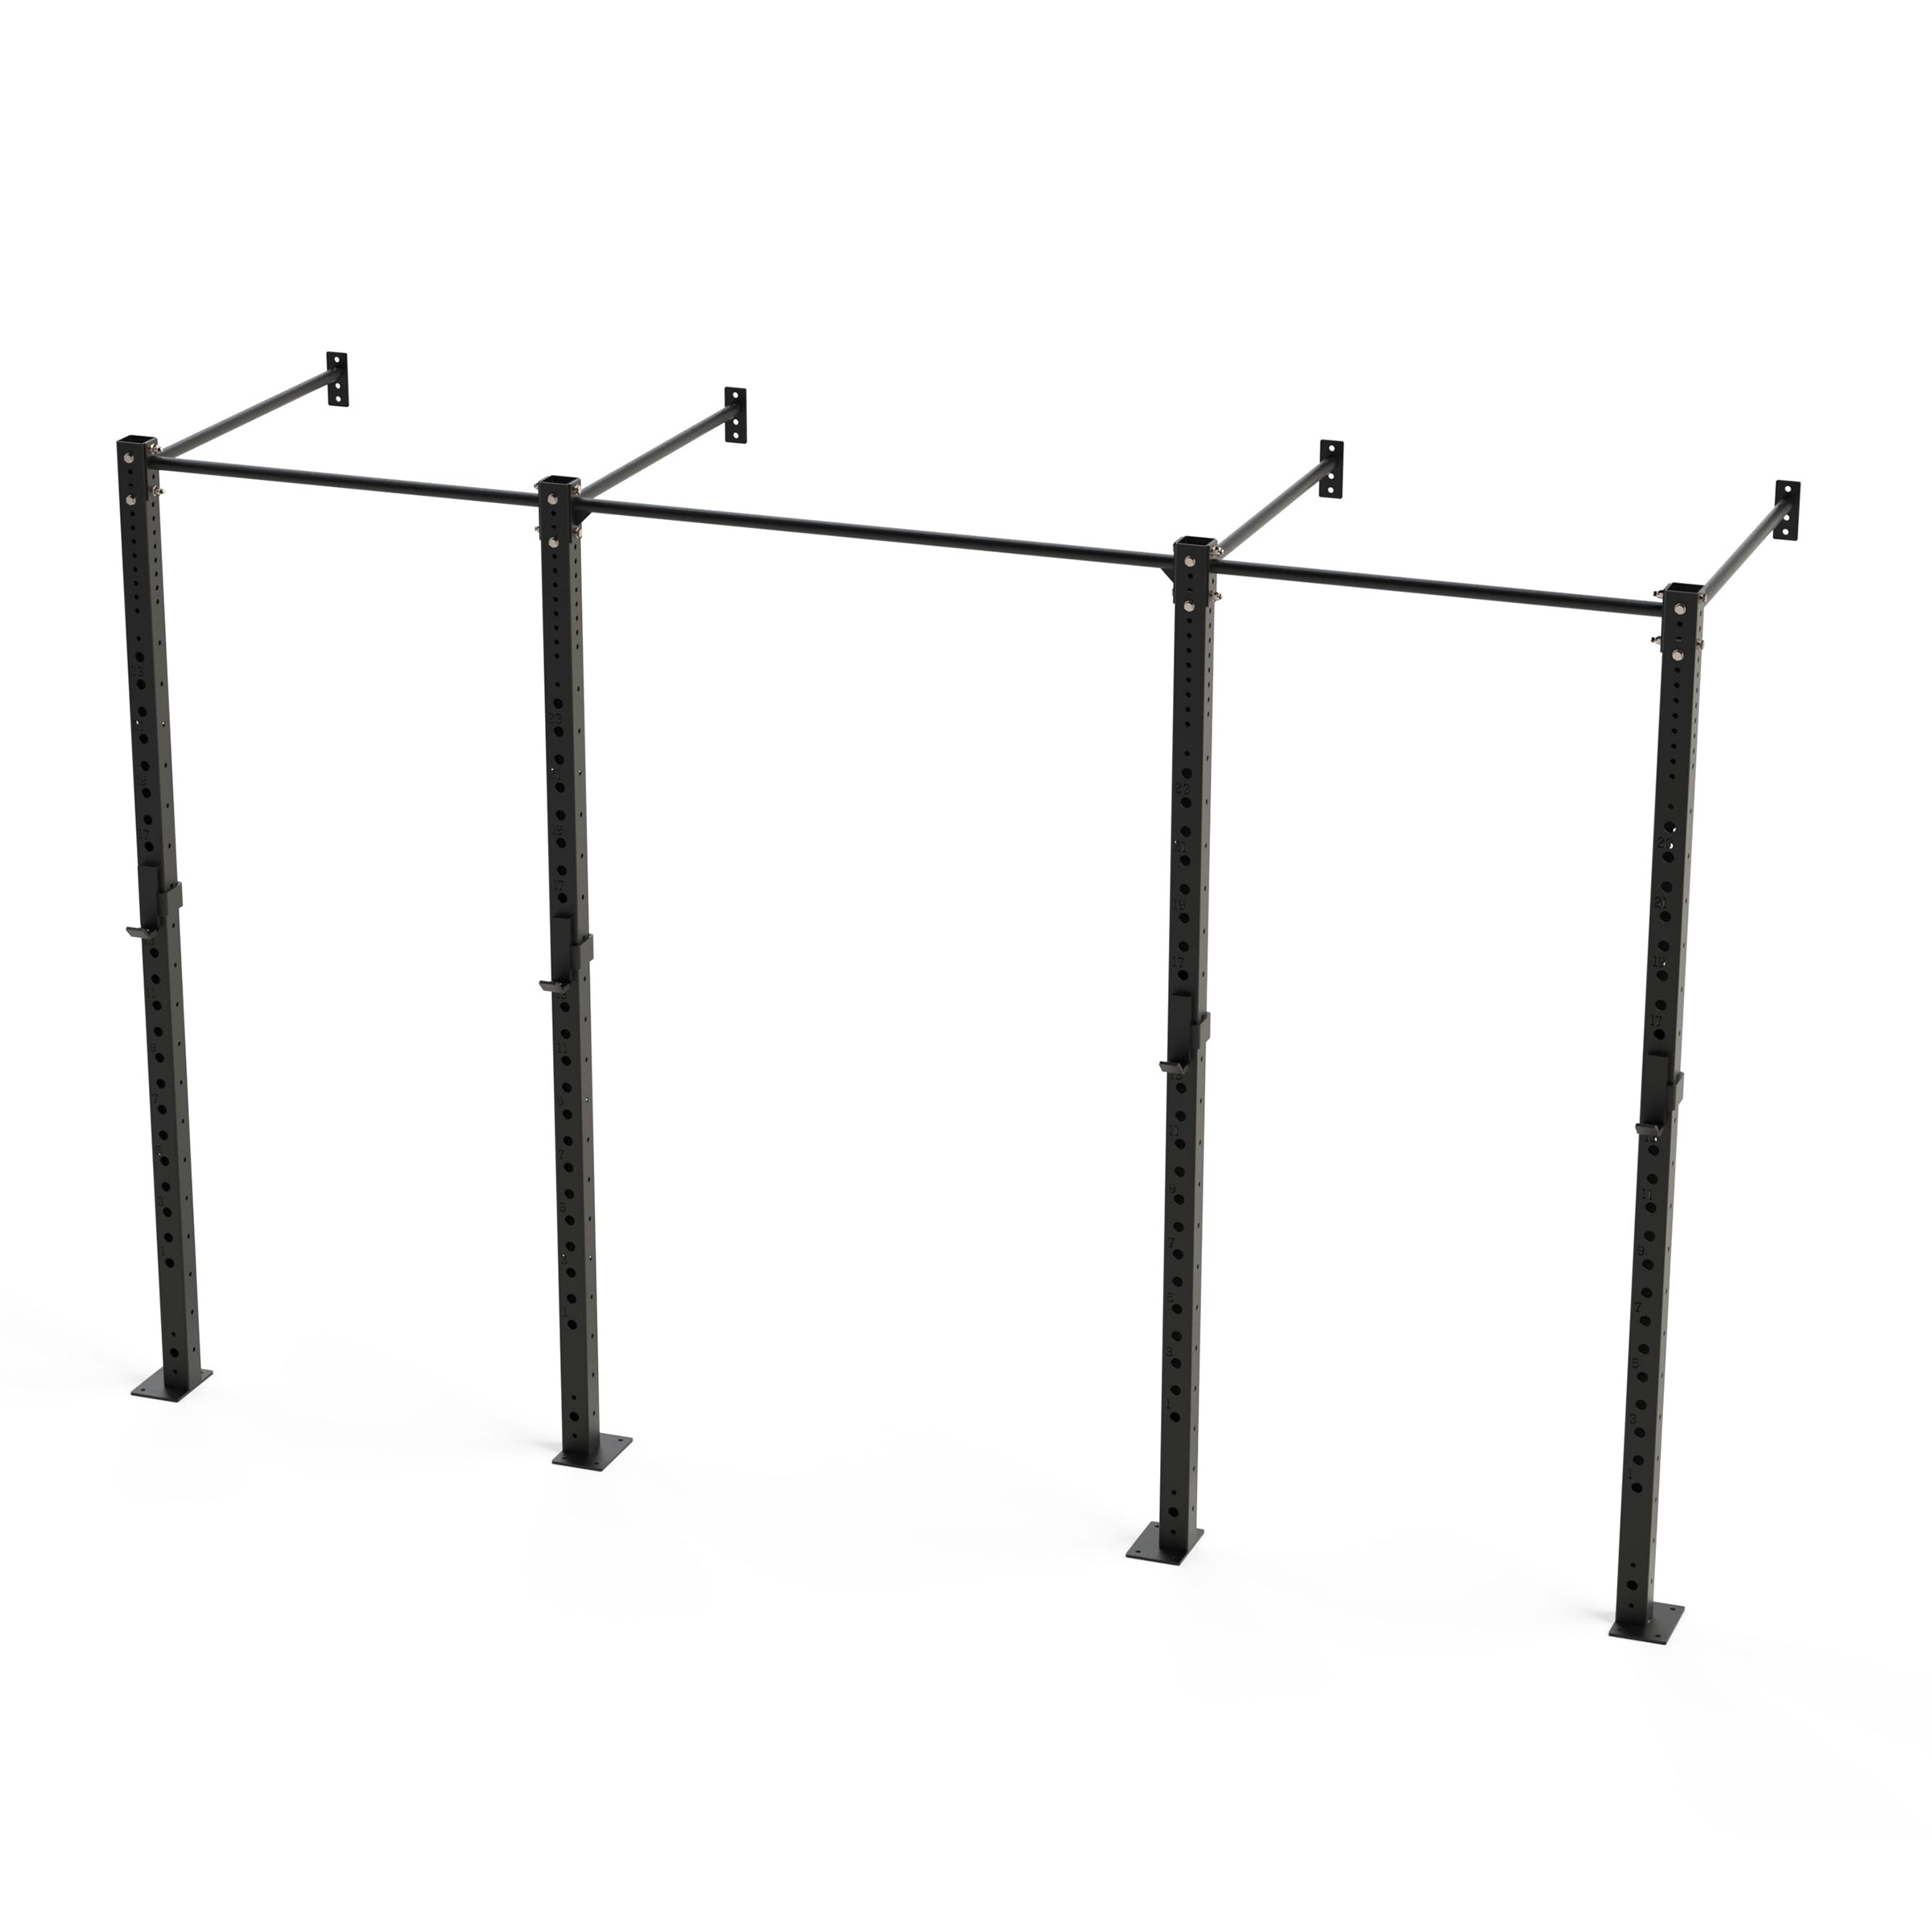 Bison Series - 2 Bay Wall Mounted Rig - Wolverson Fitness